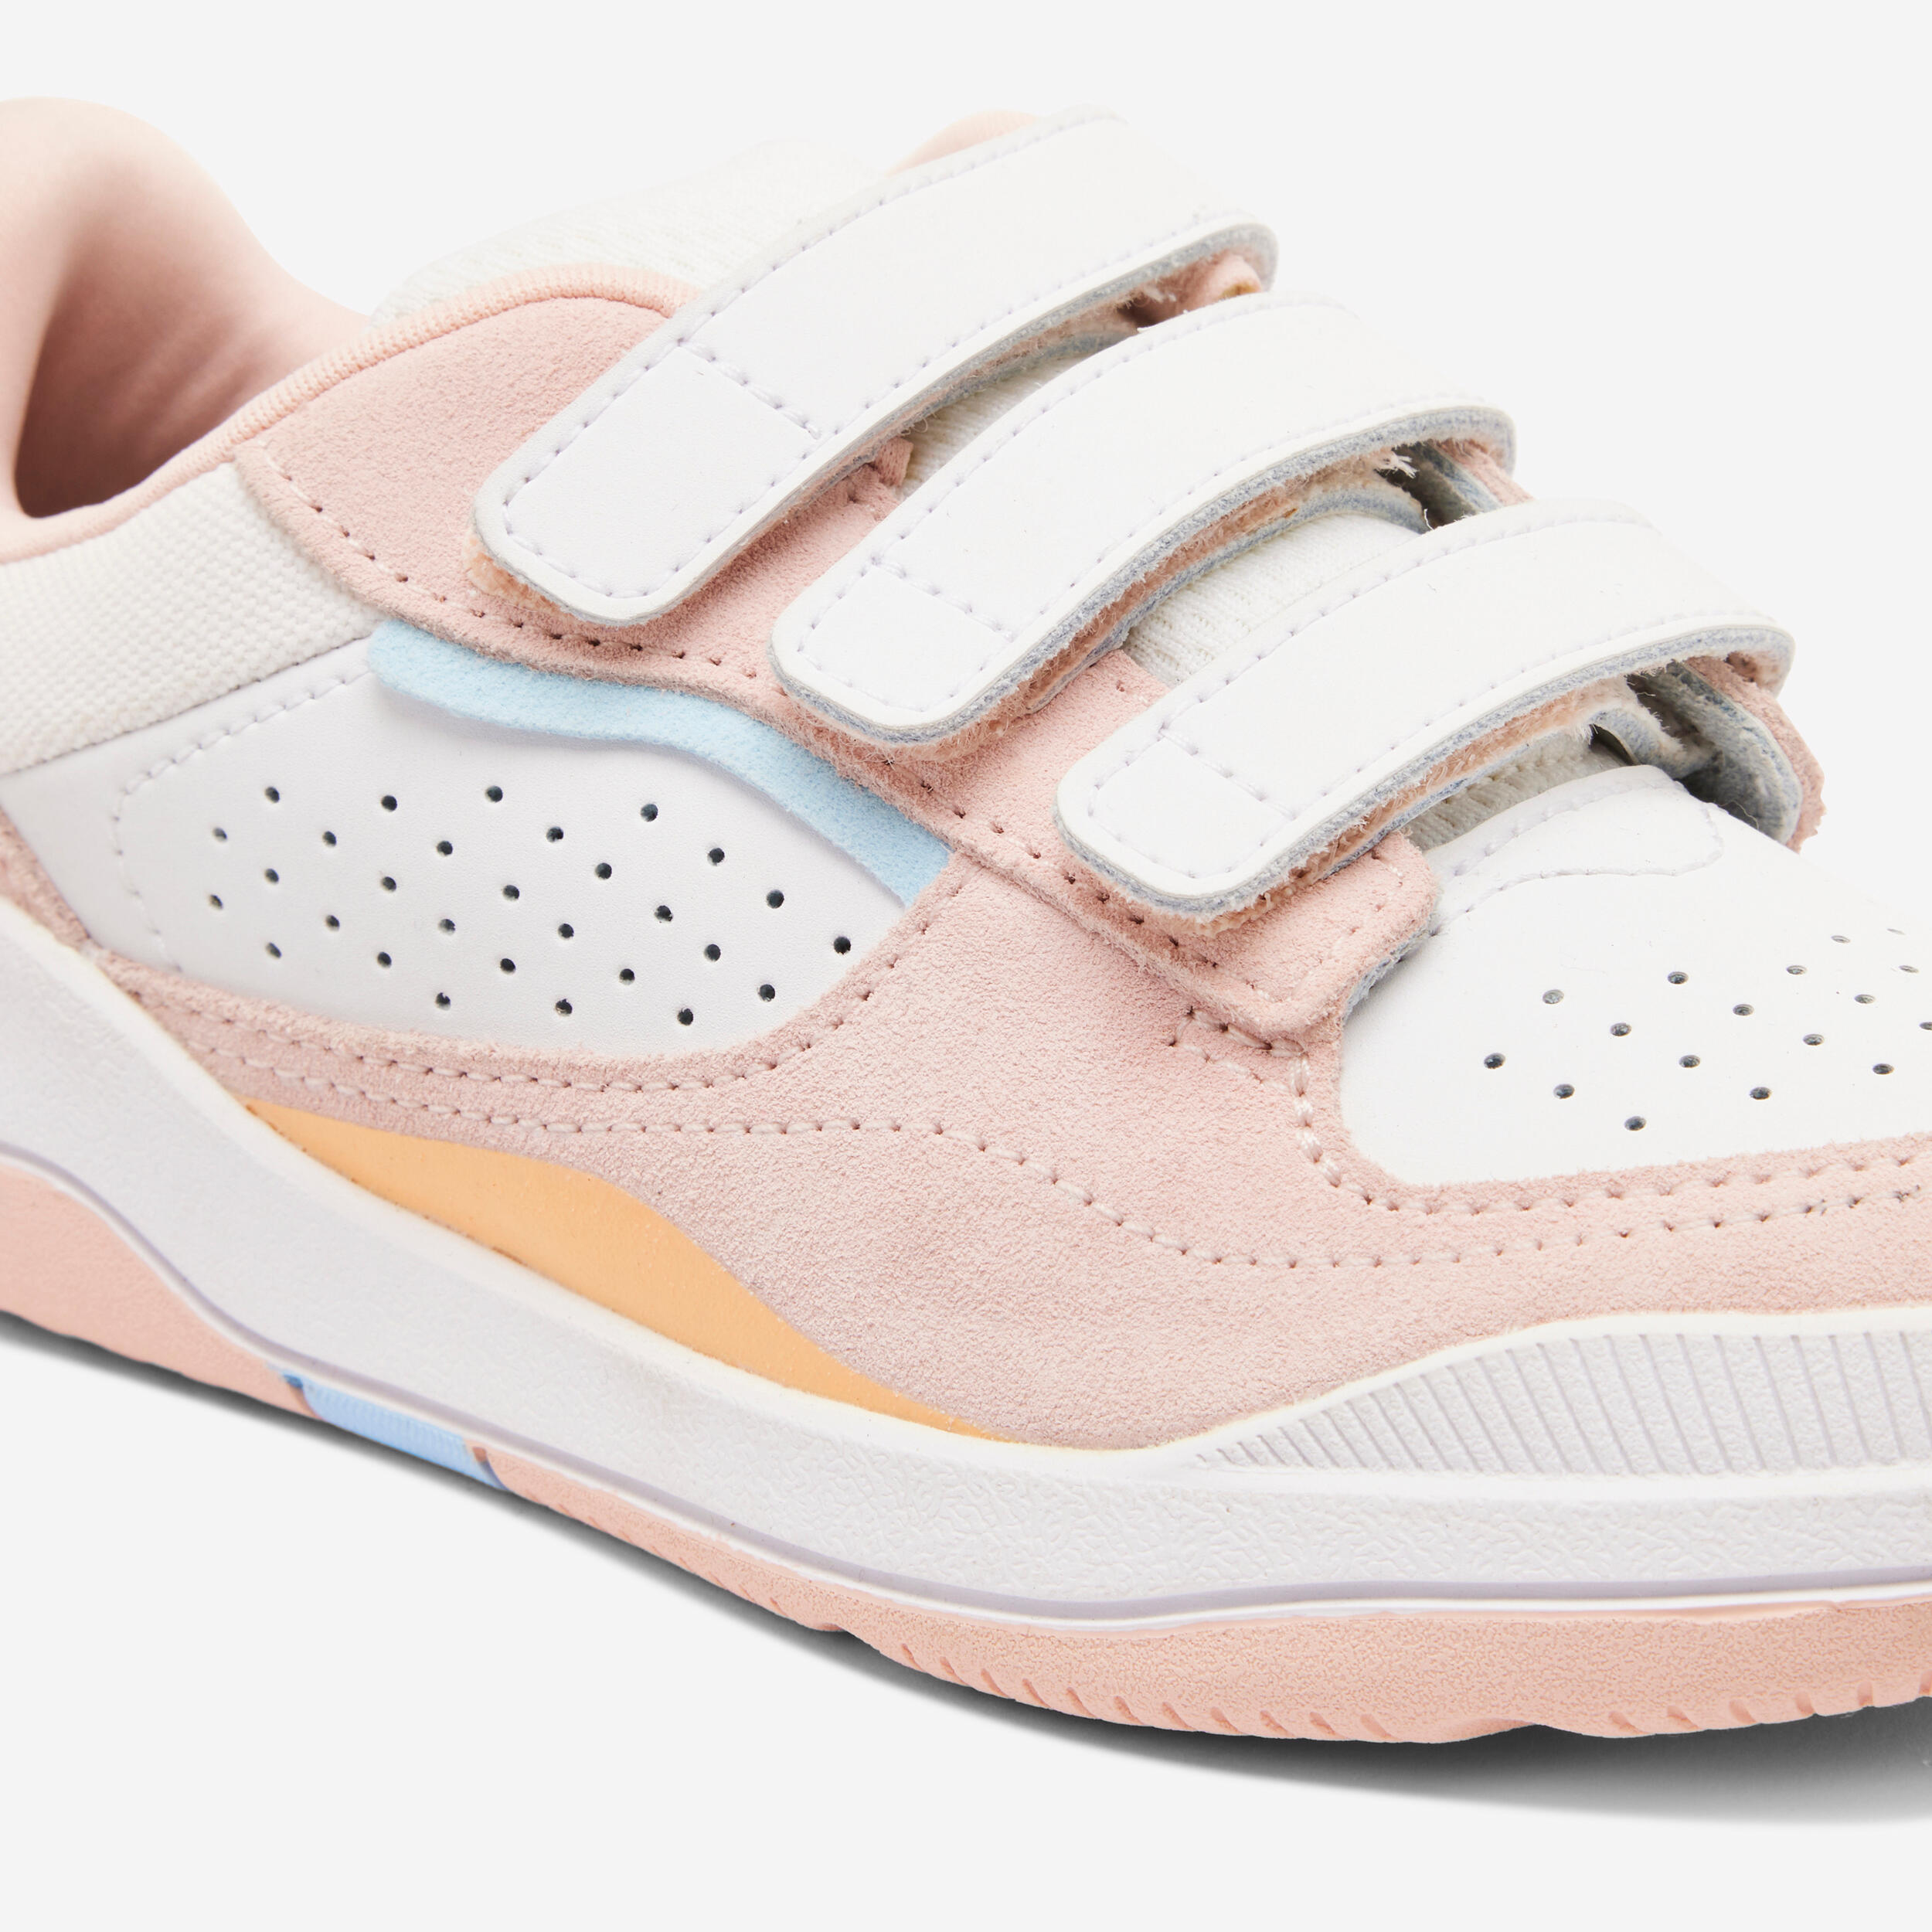 Kids' Lace-Up Shoes Playventure City - White/Pink 2/7